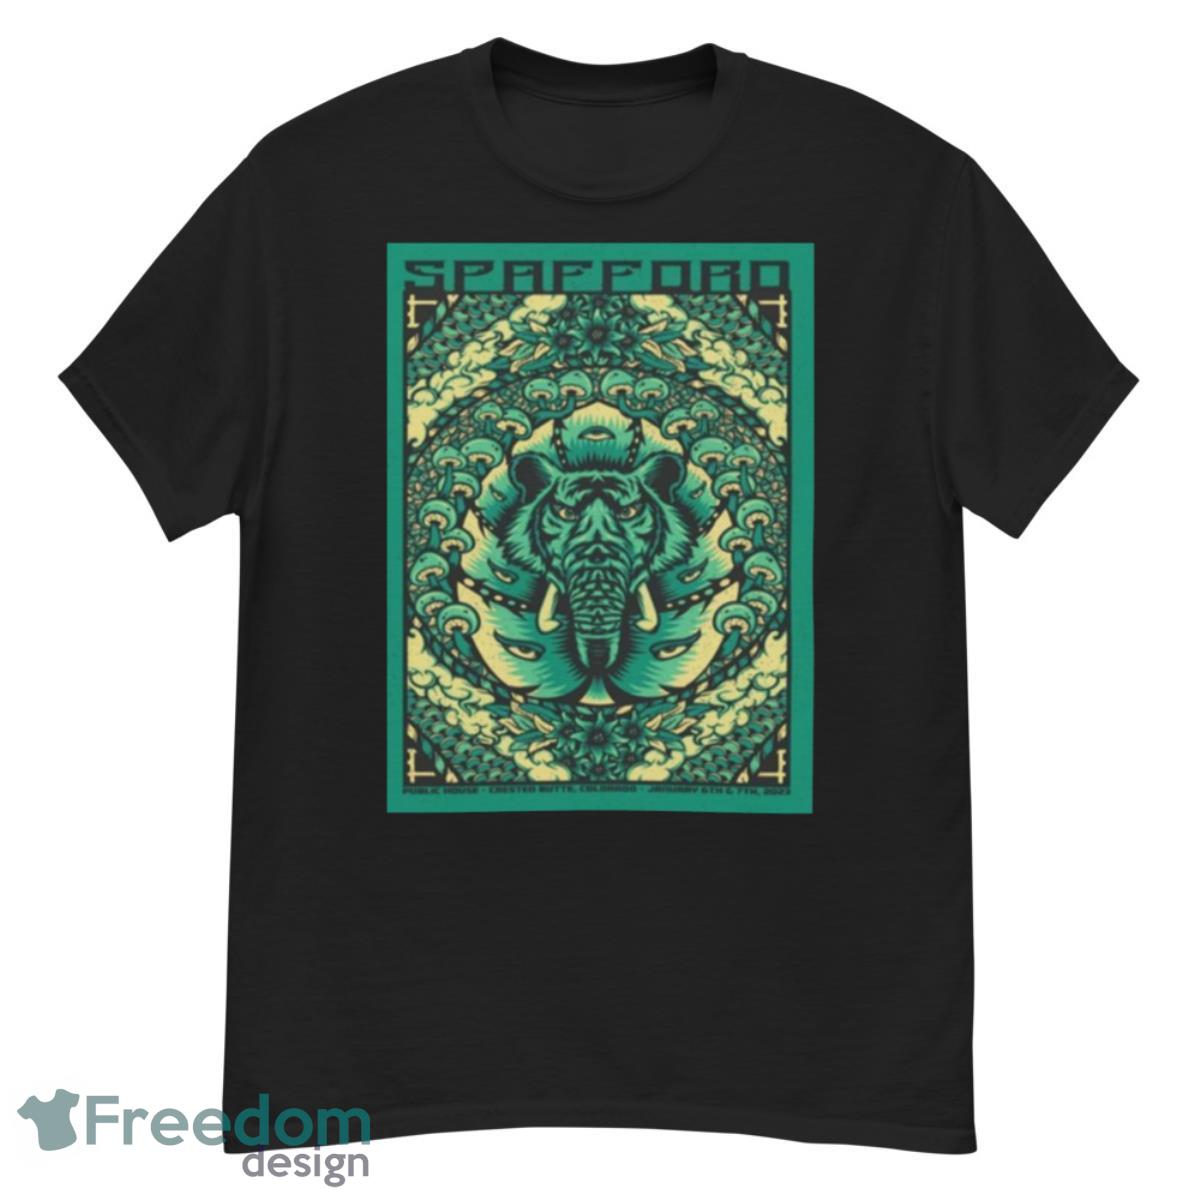 Spafford Colorado 2023 public house crested butte jan 6th and 7th poster shirt - G500 Men’s Classic T-Shirt